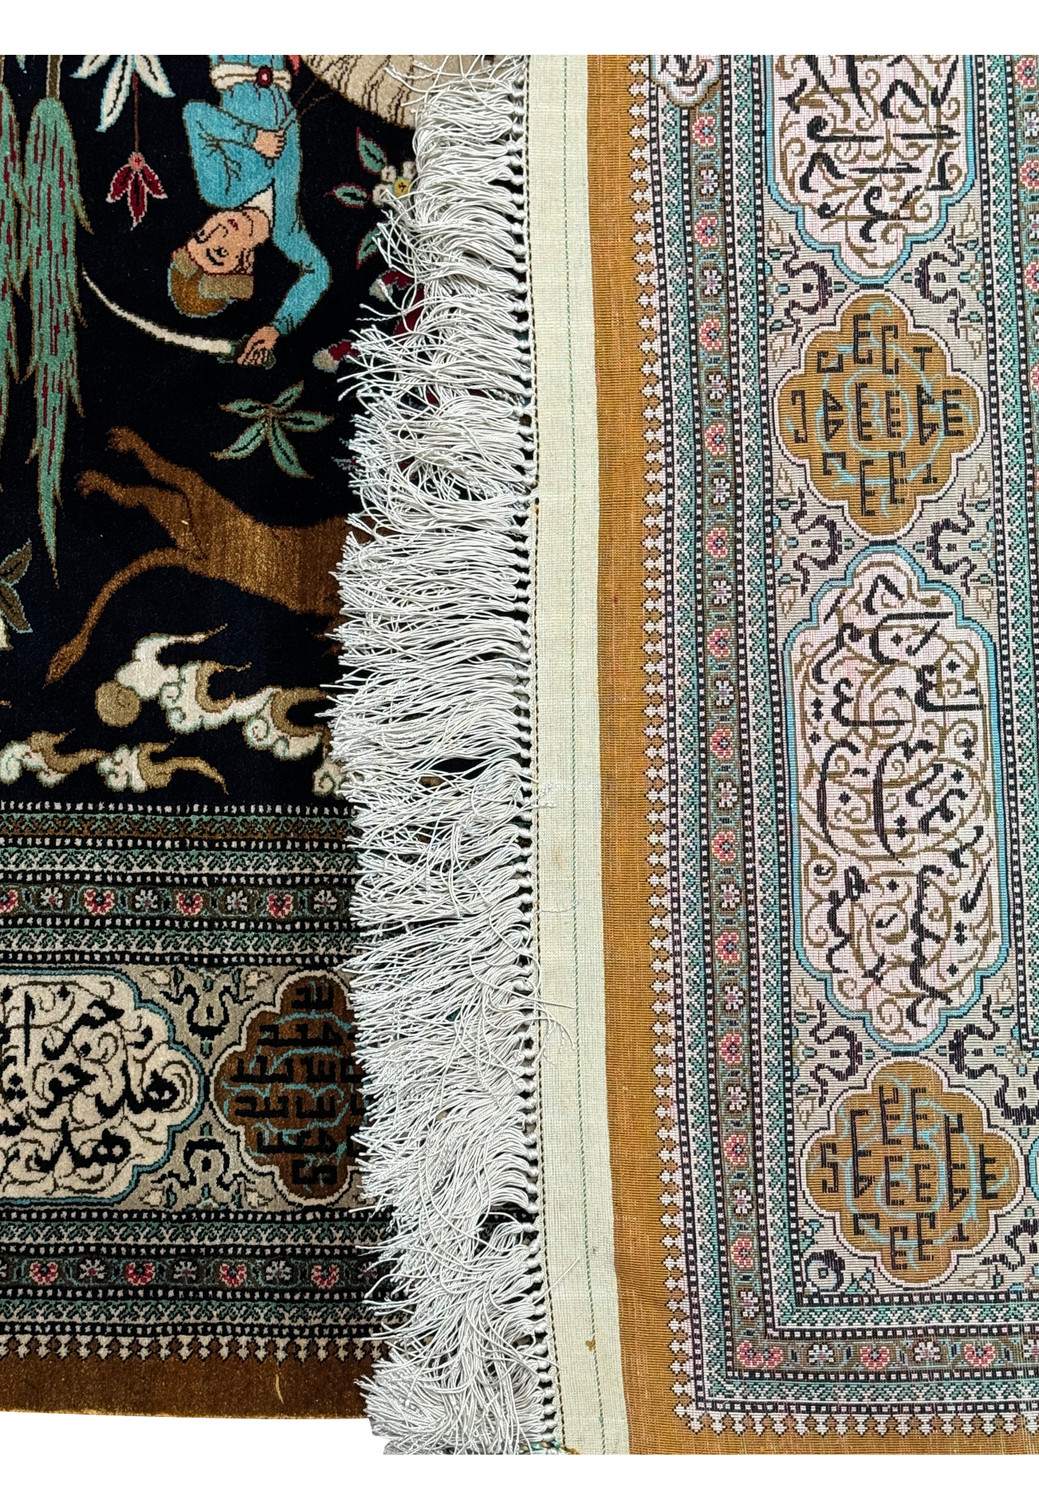 The back of the rug of a Persian Qum Rug 5x7 showing the back of the rug to emphasize the high quality weaving technique